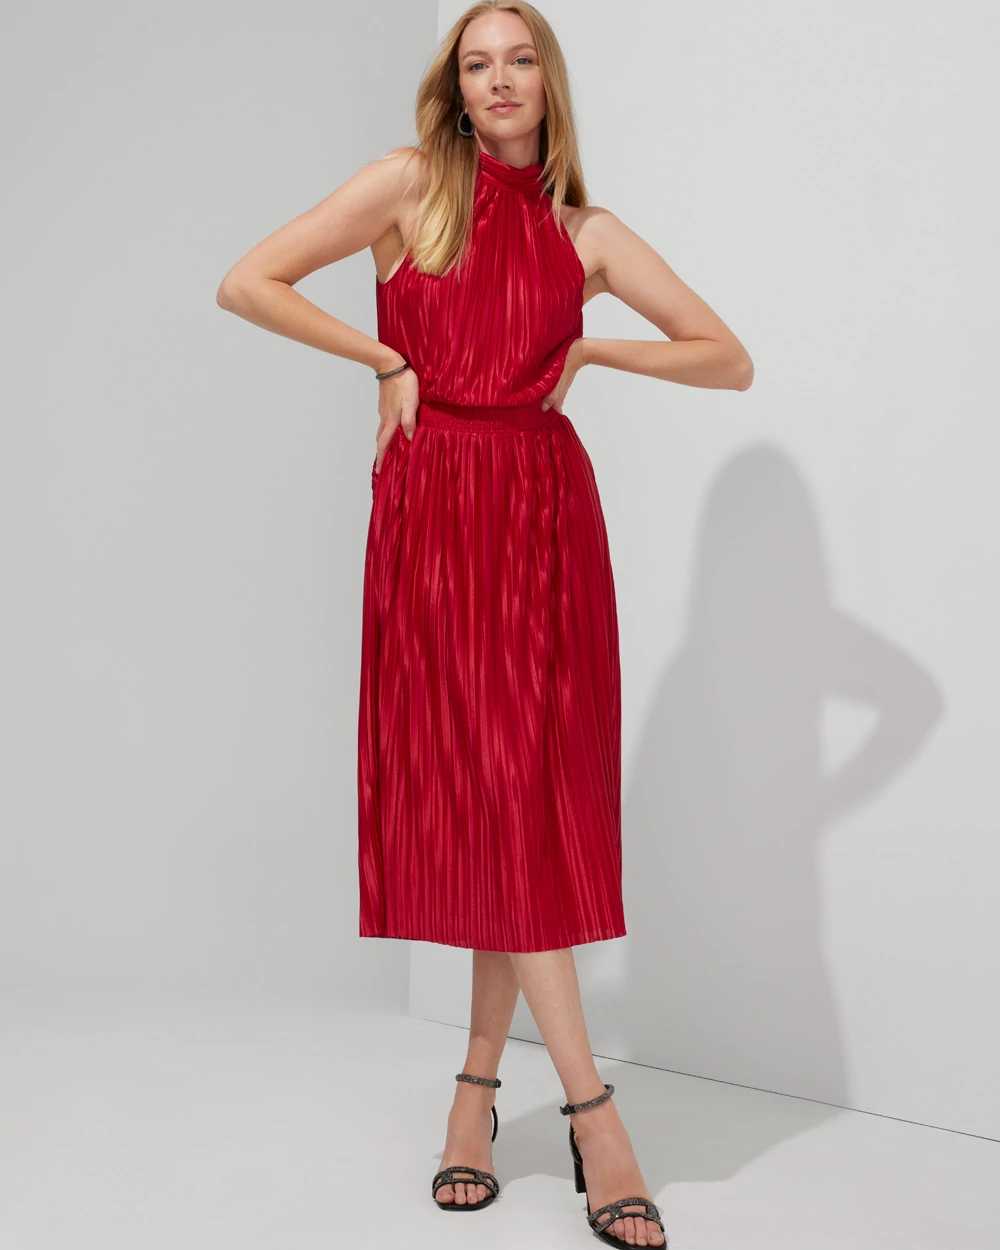 Outlet WHBM Sleeveless Halter Pleated Midi Dress click to view larger image.